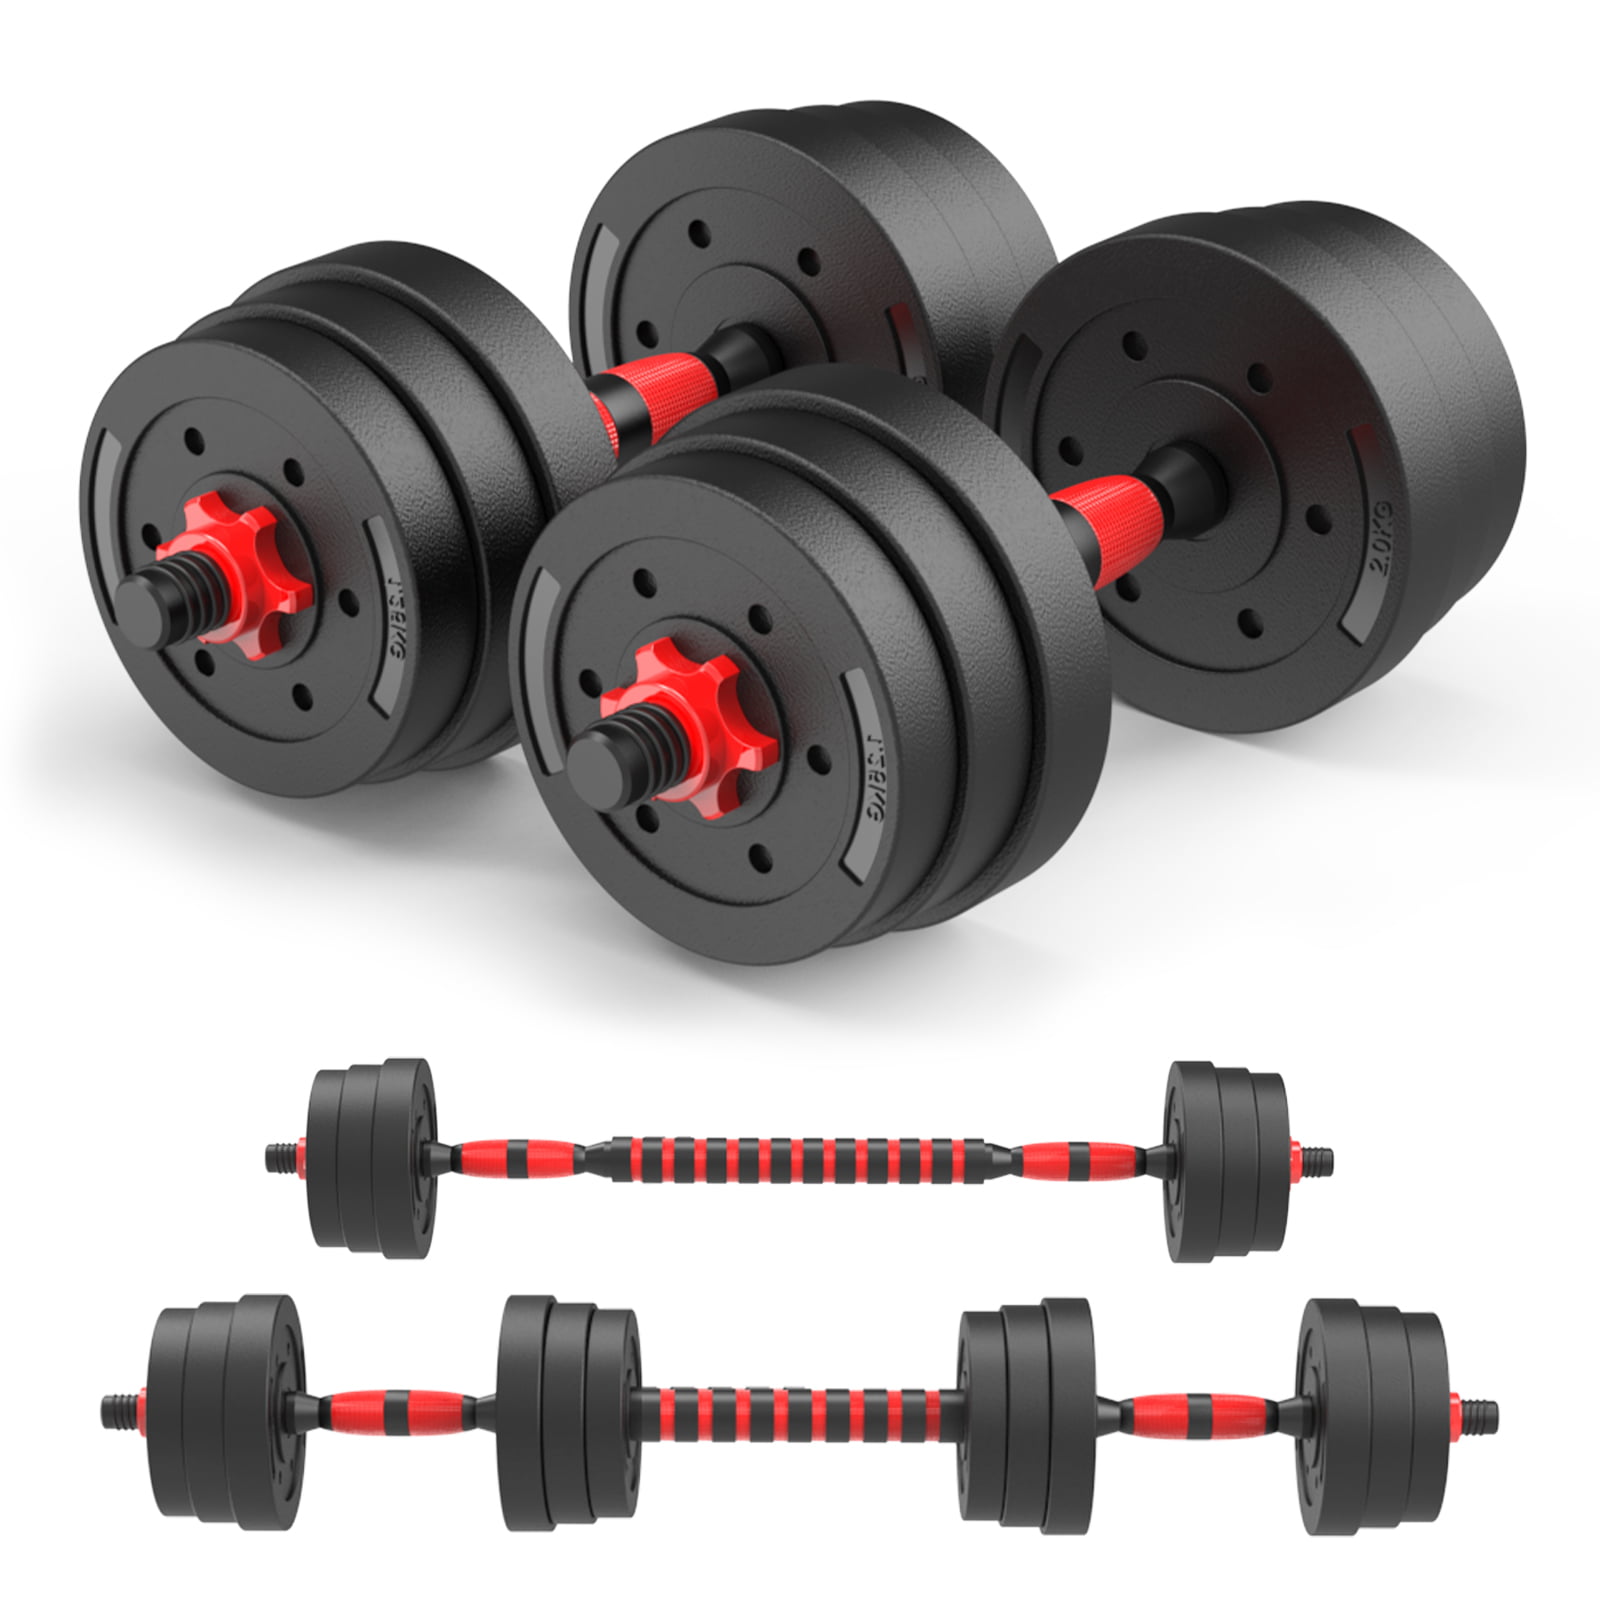 Details about   Professional 66LBS Adjustable Weights Dumbbell Set Home Gym Exercise